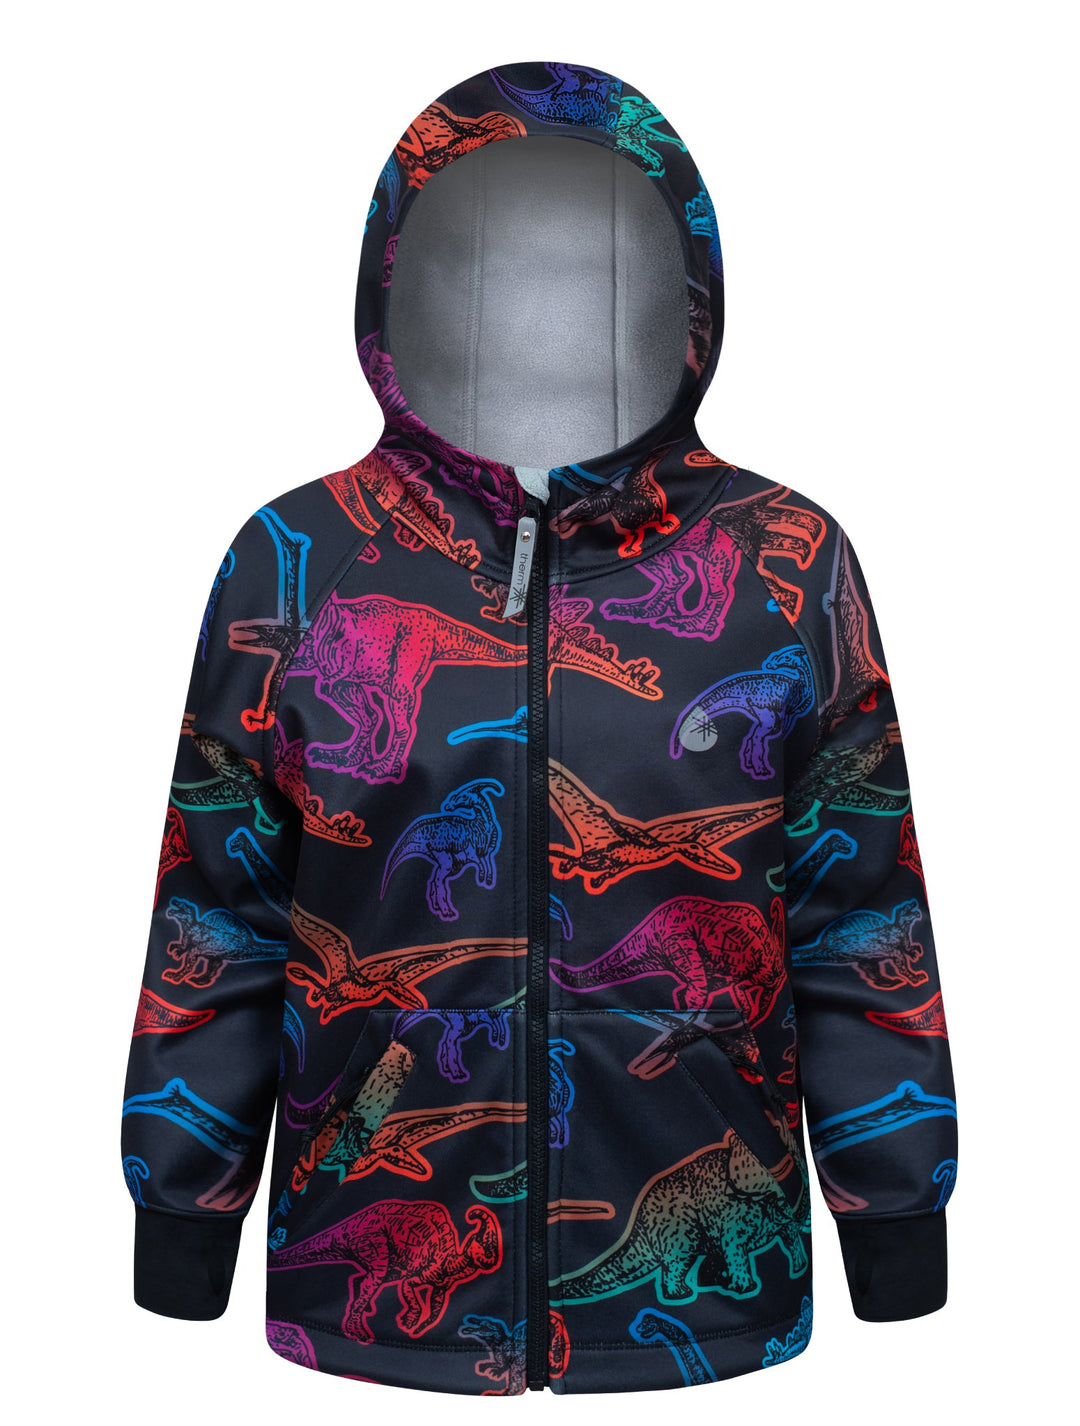 All-Weather Hoodie - Neon Dino